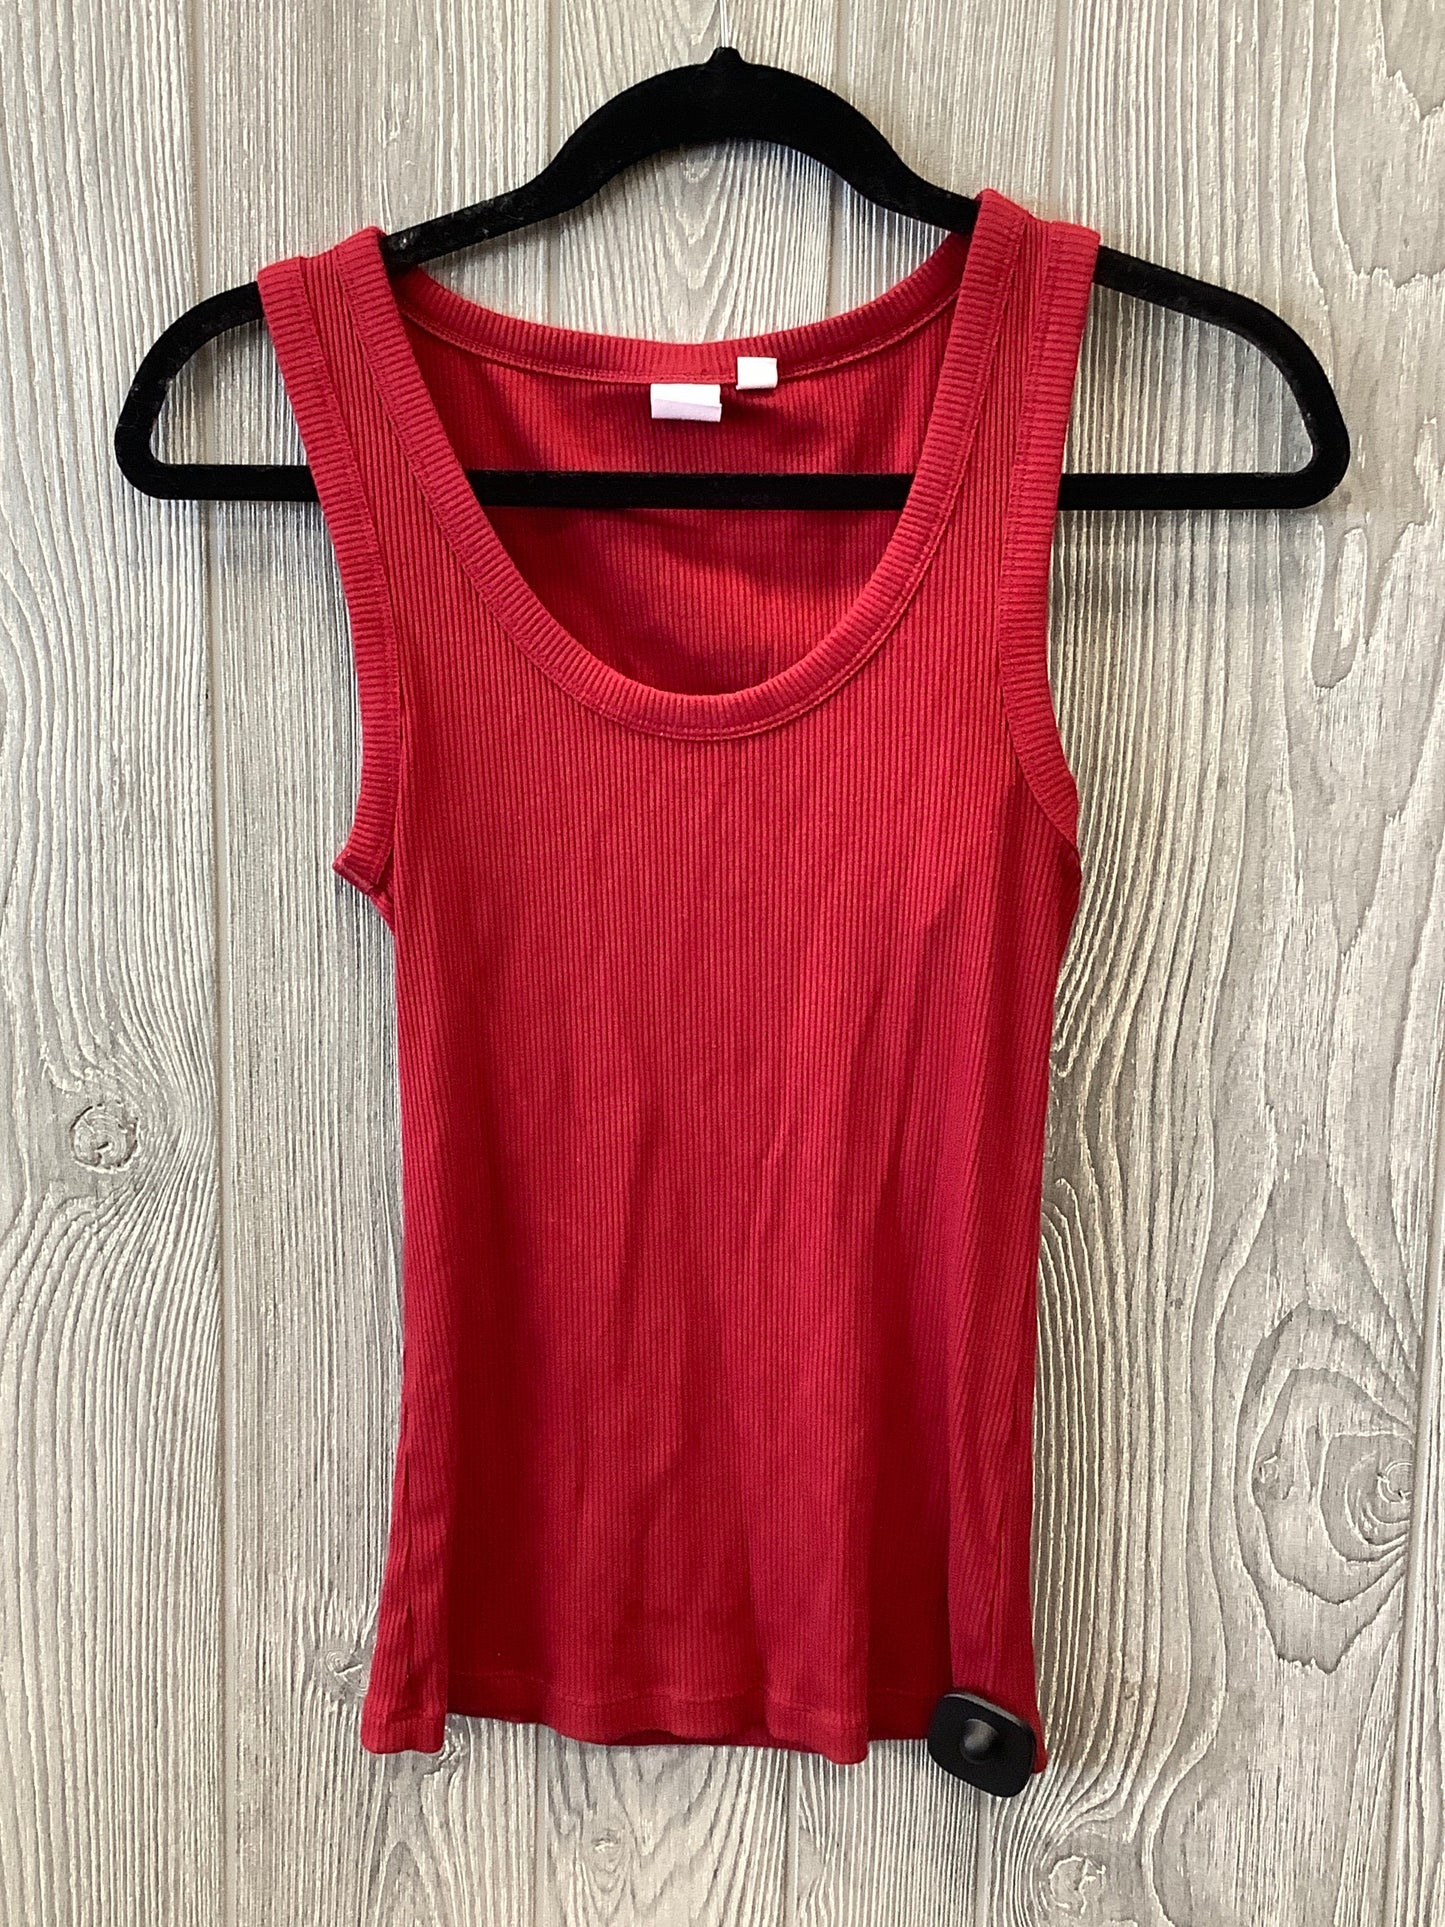 Red Top Sleeveless Gap, Size S